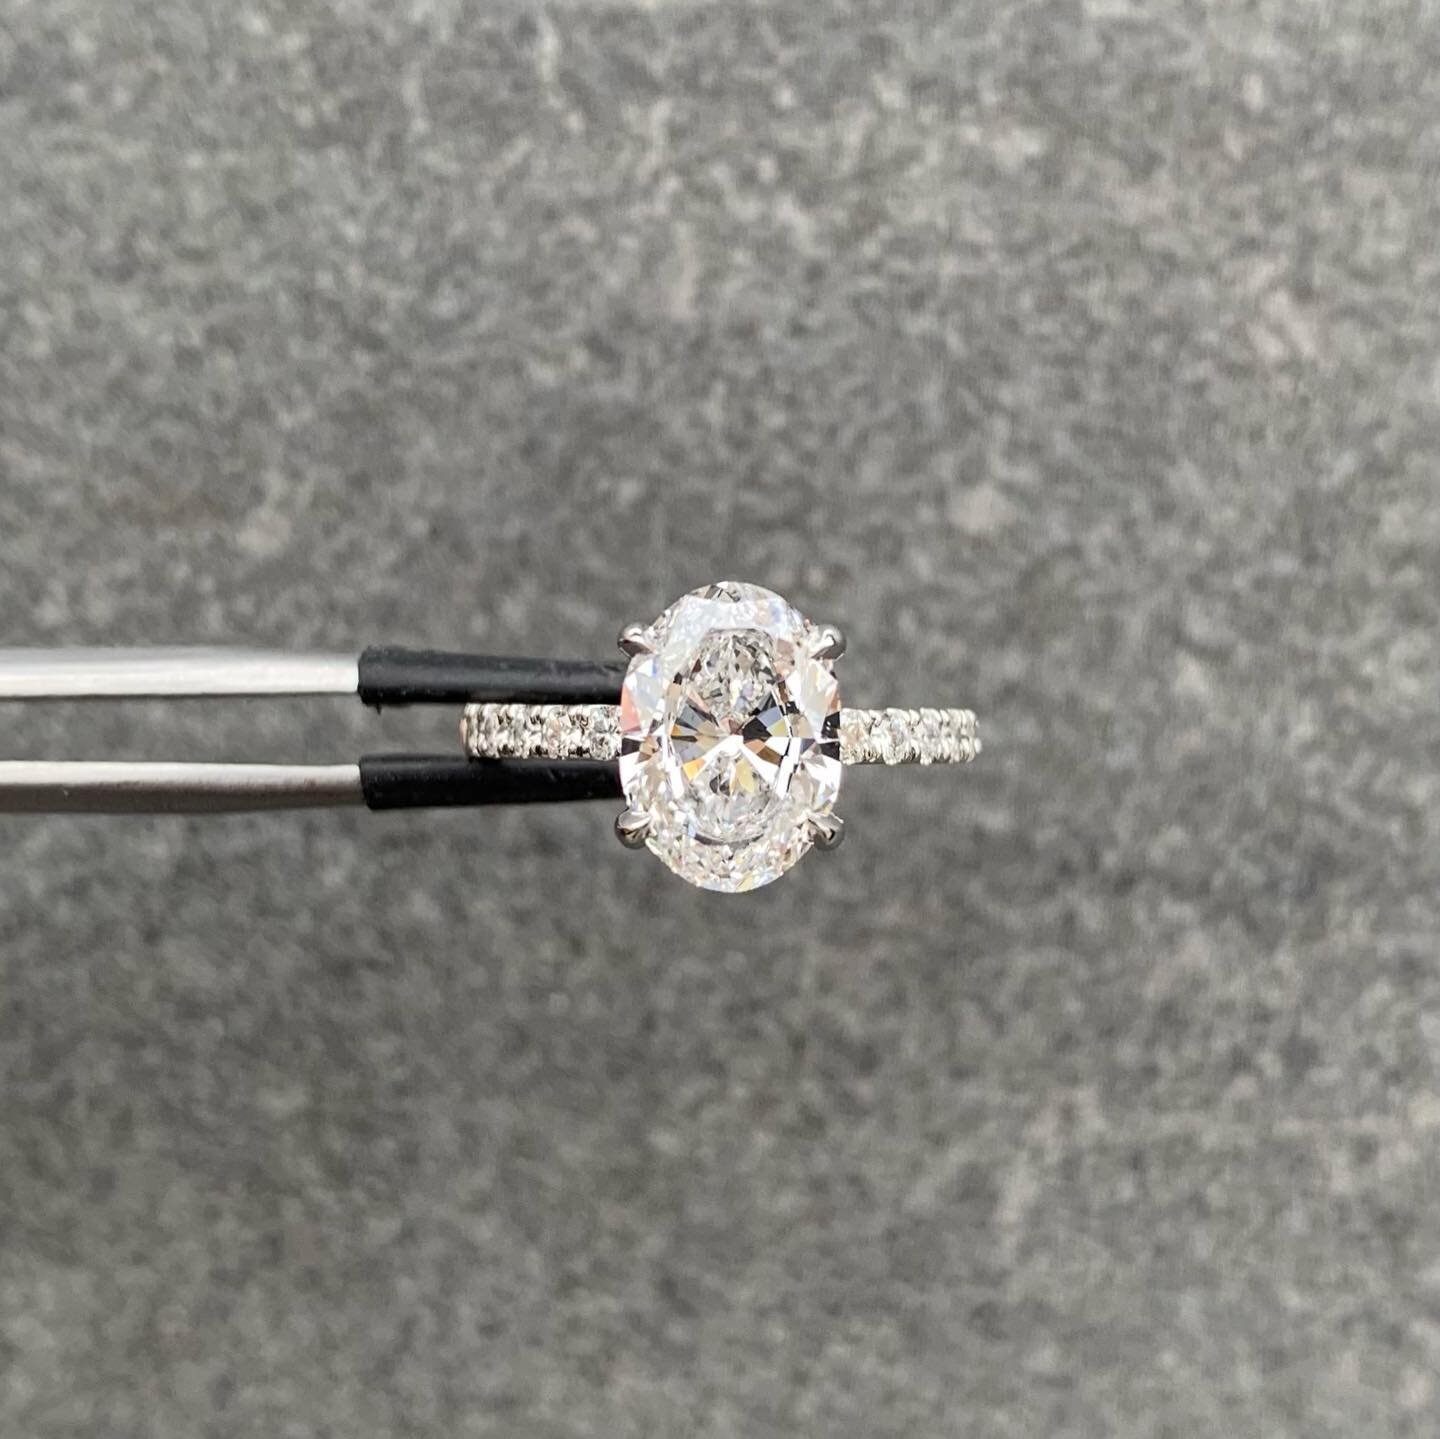 Custom Handcrafted Engagement Ring to celebrate 2021 and a new engagement! 🥳🍾🎊👏🎈
An Oval GIA certified Brilliant Diamond made with a hidden halo and ruby signifying her birthstone in the inside of the band. 
Swipe 👉 to see the hidden halo!
&mda